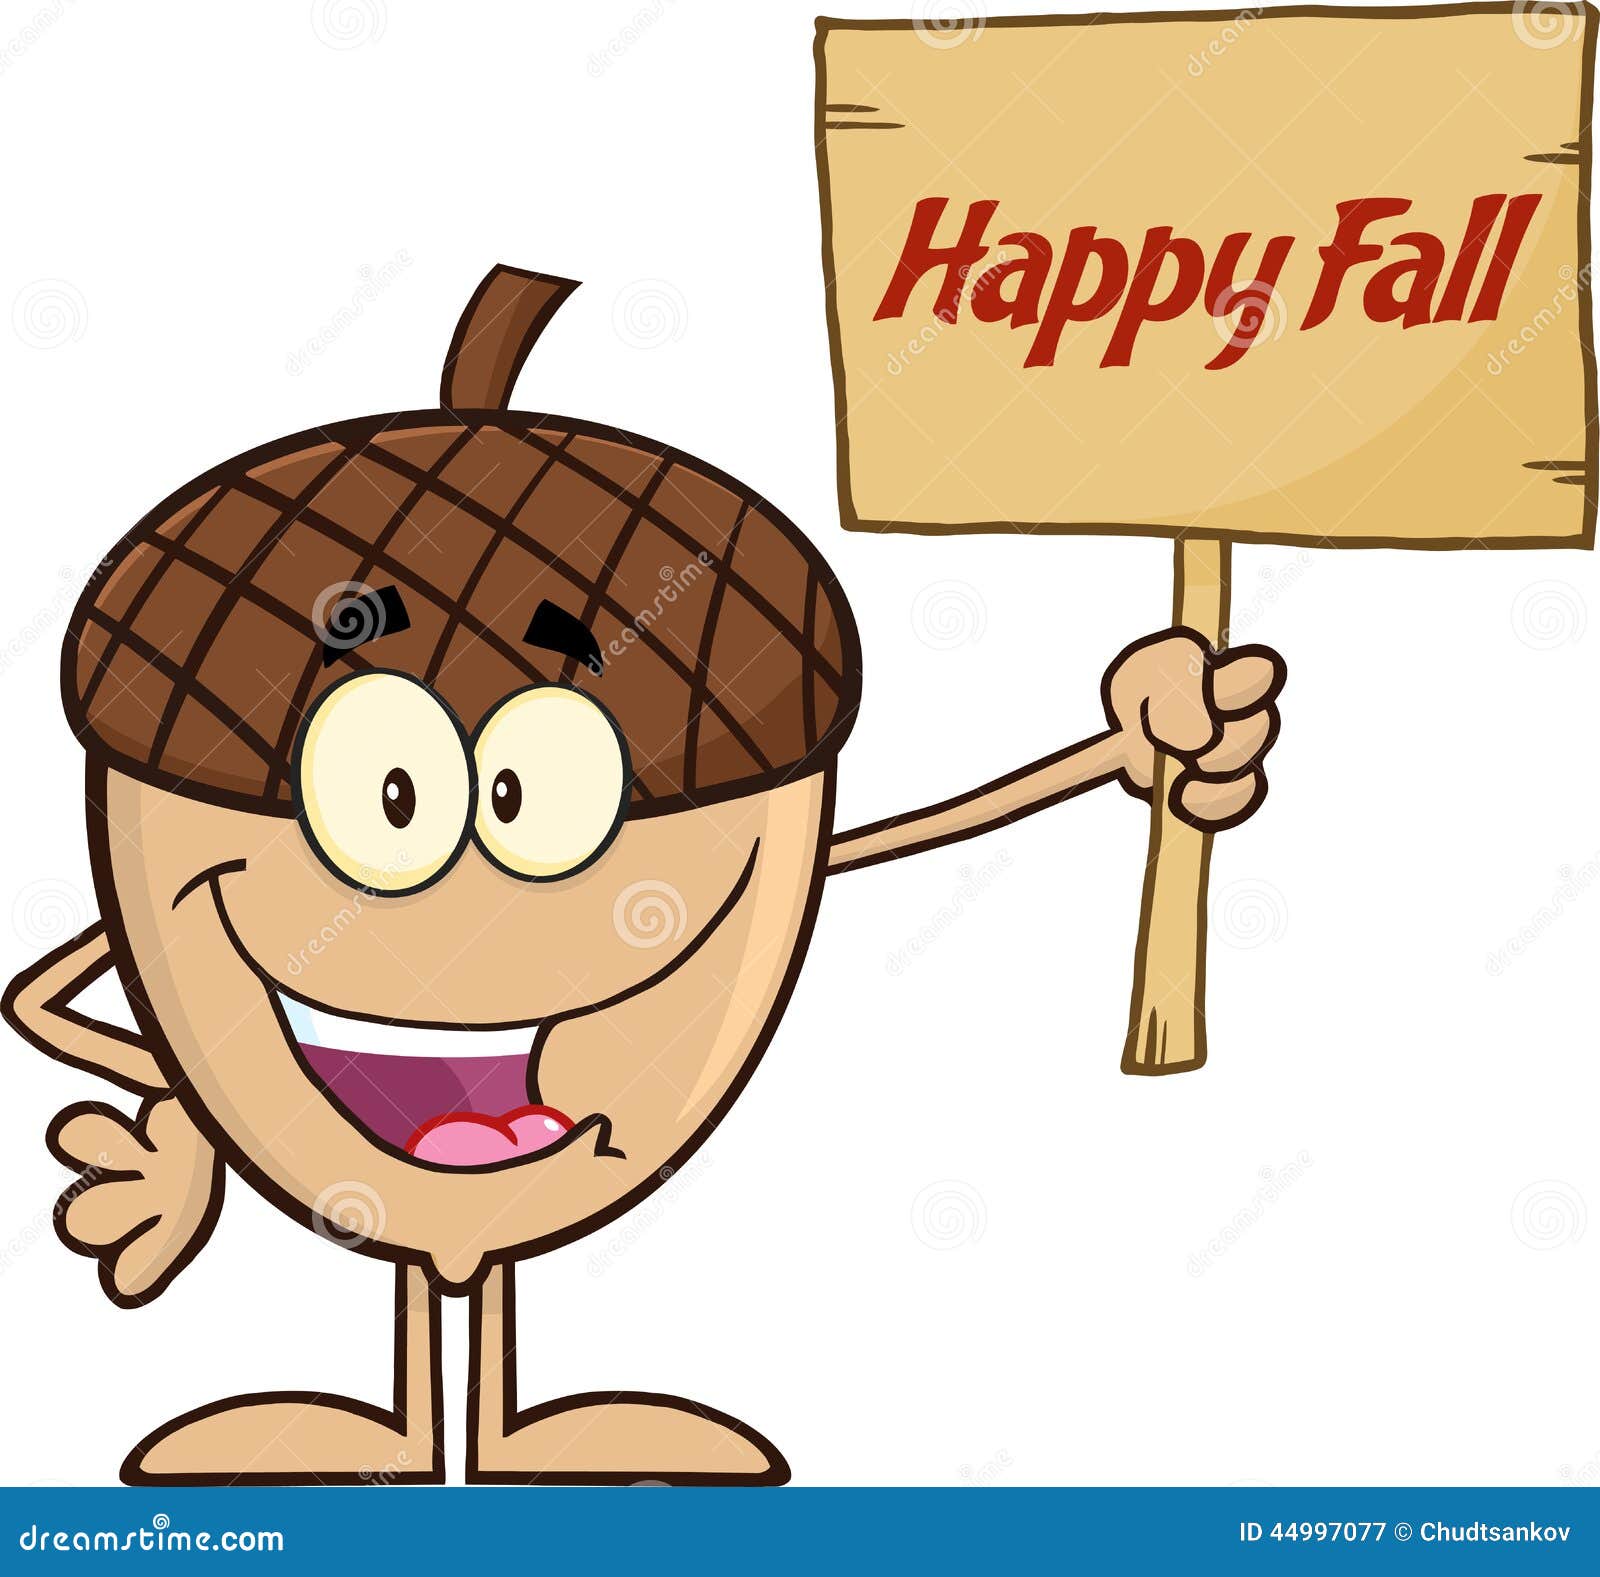 Smiling Acorn Cartoon Character Holding a Wooden Board with Text Happy Fall  Stock Illustration - Illustration of natural, flora: 44997077